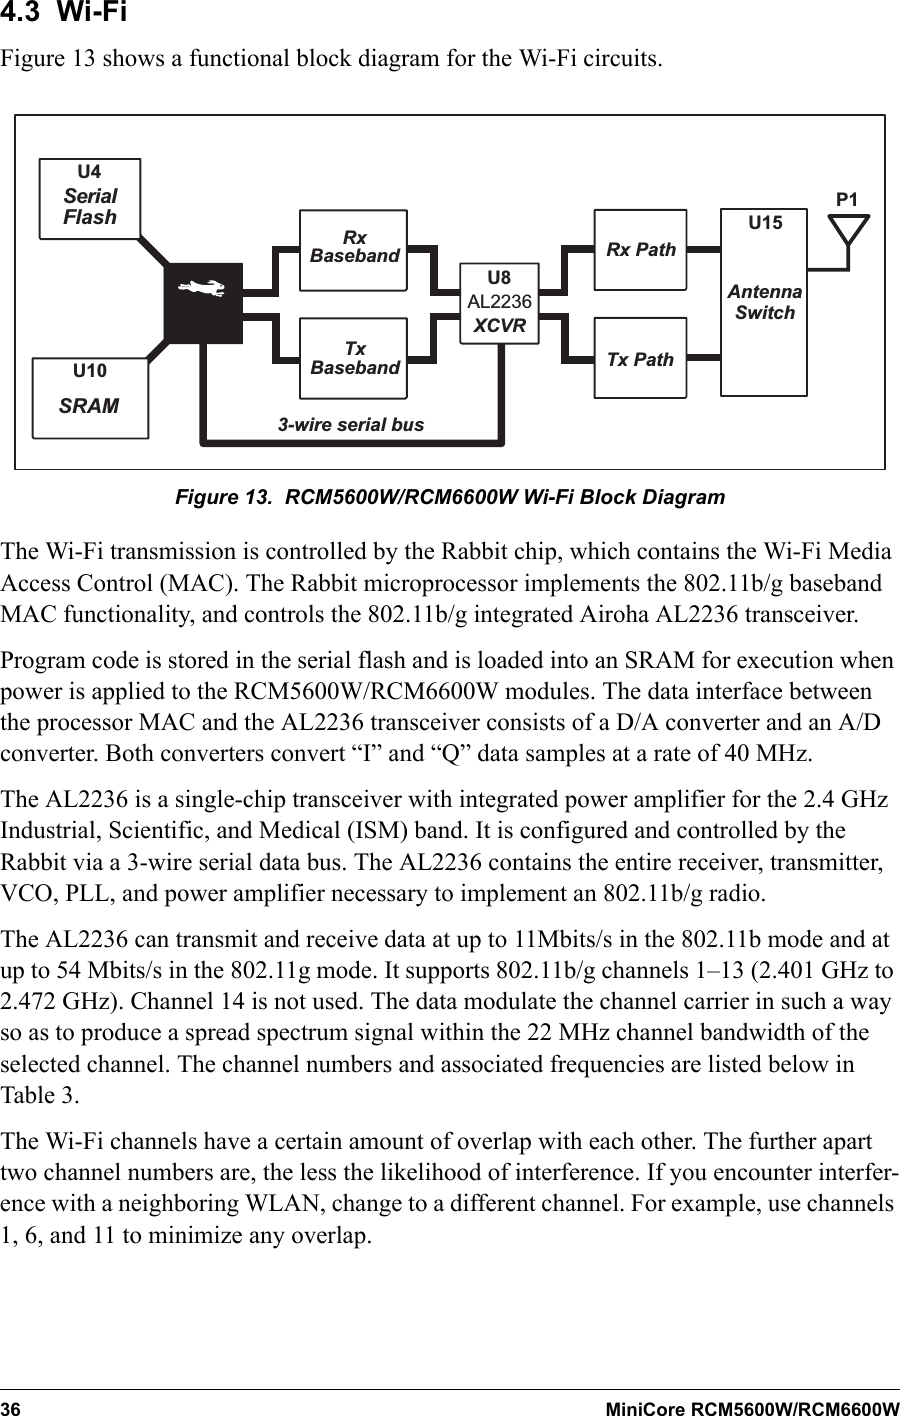 36 MiniCore RCM5600W/RCM6600W4.3  Wi-FiFigure 13 shows a functional block diagram for the Wi-Fi circuits.U15AntennaSwitchP1XCVRU8AL2236Rx PathTx PathRxBasebandTxBaseband3-wire serial busU4SerialFlashU10SRAMFigure 13.  RCM5600W/RCM6600W Wi-Fi Block DiagramThe Wi-Fi transmission is controlled by the Rabbit chip, which contains the Wi-Fi Media Access Control (MAC). The Rabbit microprocessor implements the 802.11b/g baseband MAC functionality, and controls the 802.11b/g integrated Airoha AL2236 transceiver.Program code is stored in the serial flash and is loaded into an SRAM for execution when power is applied to the RCM5600W/RCM6600W modules. The data interface between the processor MAC and the AL2236 transceiver consists of a D/A converter and an A/D converter. Both converters convert “I” and “Q” data samples at a rate of 40 MHz.The AL2236 is a single-chip transceiver with integrated power amplifier for the 2.4 GHz Industrial, Scientific, and Medical (ISM) band. It is configured and controlled by the Rabbit via a 3-wire serial data bus. The AL2236 contains the entire receiver, transmitter, VCO, PLL, and power amplifier necessary to implement an 802.11b/g radio. The AL2236 can transmit and receive data at up to 11Mbits/s in the 802.11b mode and at up to 54 Mbits/s in the 802.11g mode. It supports 802.11b/g channels 1–13 (2.401 GHz to 2.472 GHz). Channel 14 is not used. The data modulate the channel carrier in such a way so as to produce a spread spectrum signal within the 22 MHz channel bandwidth of the selected channel. The channel numbers and associated frequencies are listed below in Table 3.The Wi-Fi channels have a certain amount of overlap with each other. The further apart two channel numbers are, the less the likelihood of interference. If you encounter interfer-ence with a neighboring WLAN, change to a different channel. For example, use channels 1, 6, and 11 to minimize any overlap.